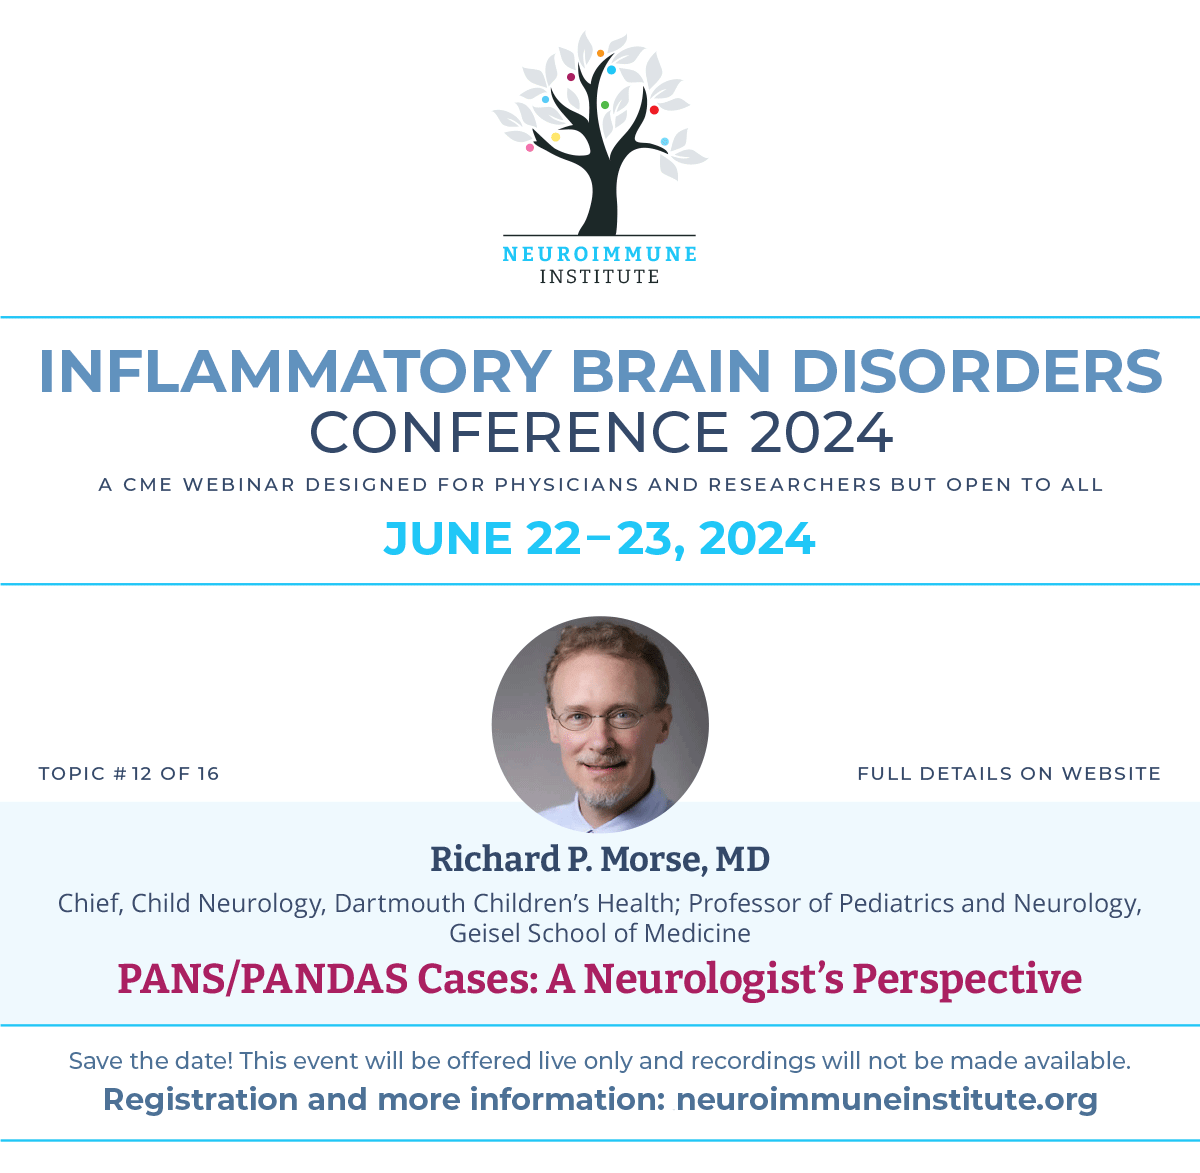 We are really looking forward to the 2024 Inflammatory Brain Disorders Conference and the phenomenal speakers from around the world who will be joining us to share the latest research and their clinical expertise. #cme #neuroinflammation